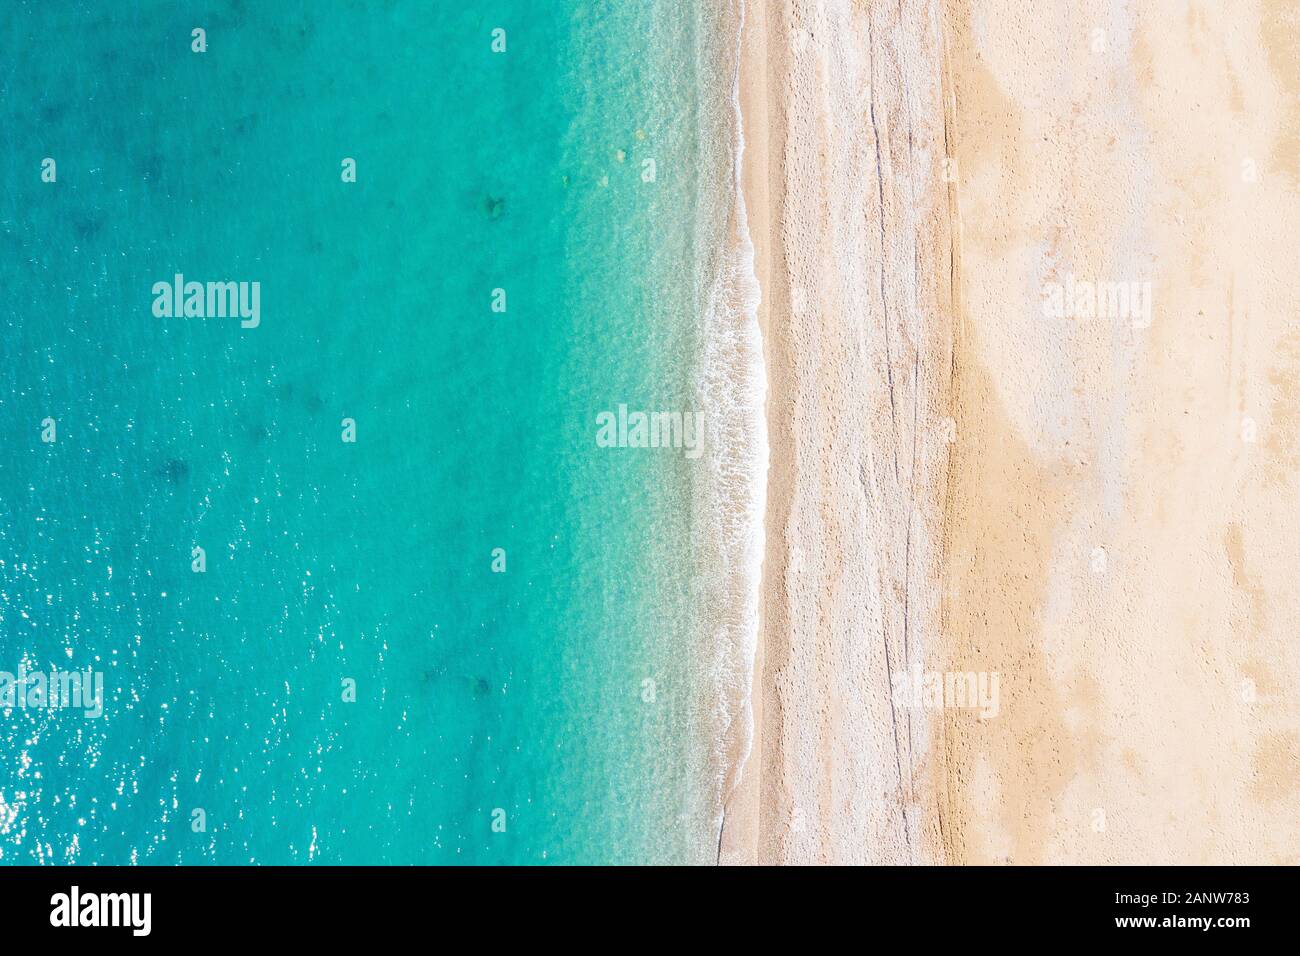 Aerial view of turquoise sea waves and sandy beach, Turkey, Antalya Stock Photo